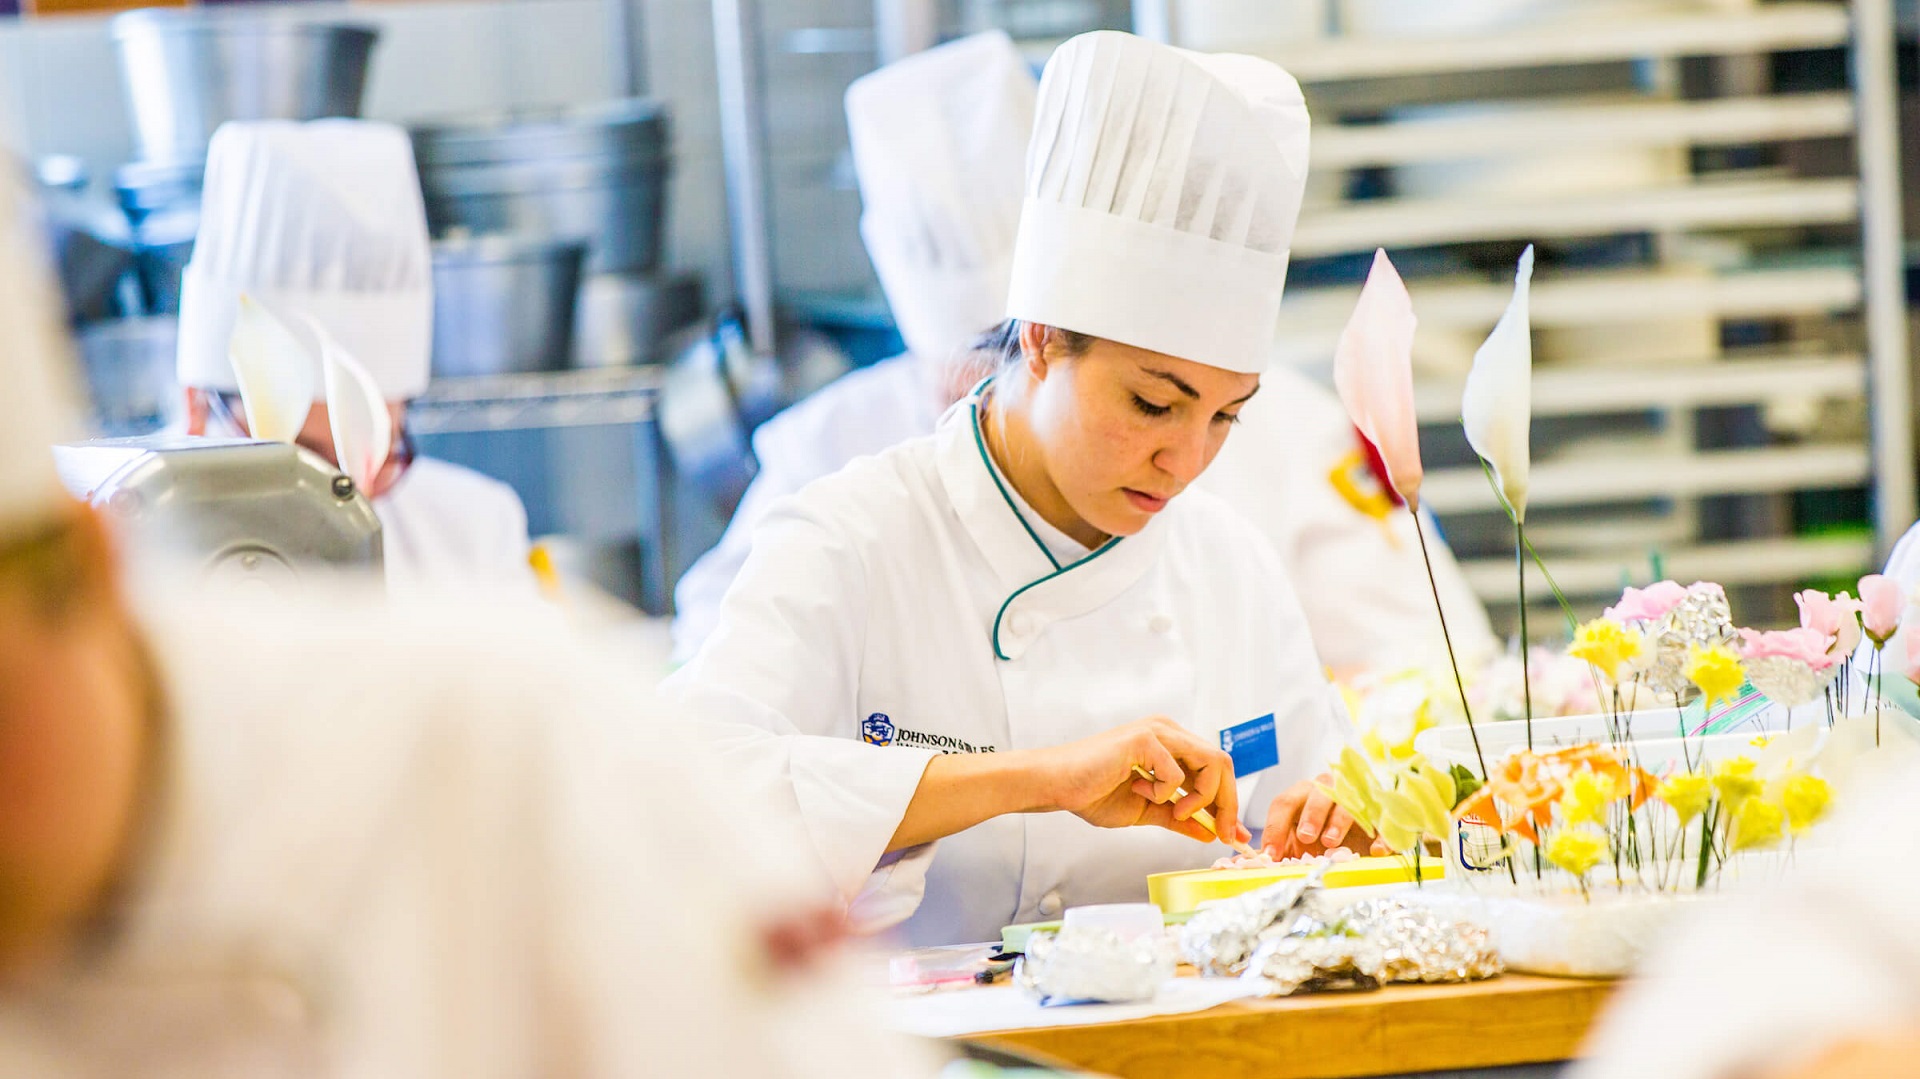 Learn What Pastry Chef Grads Can Do